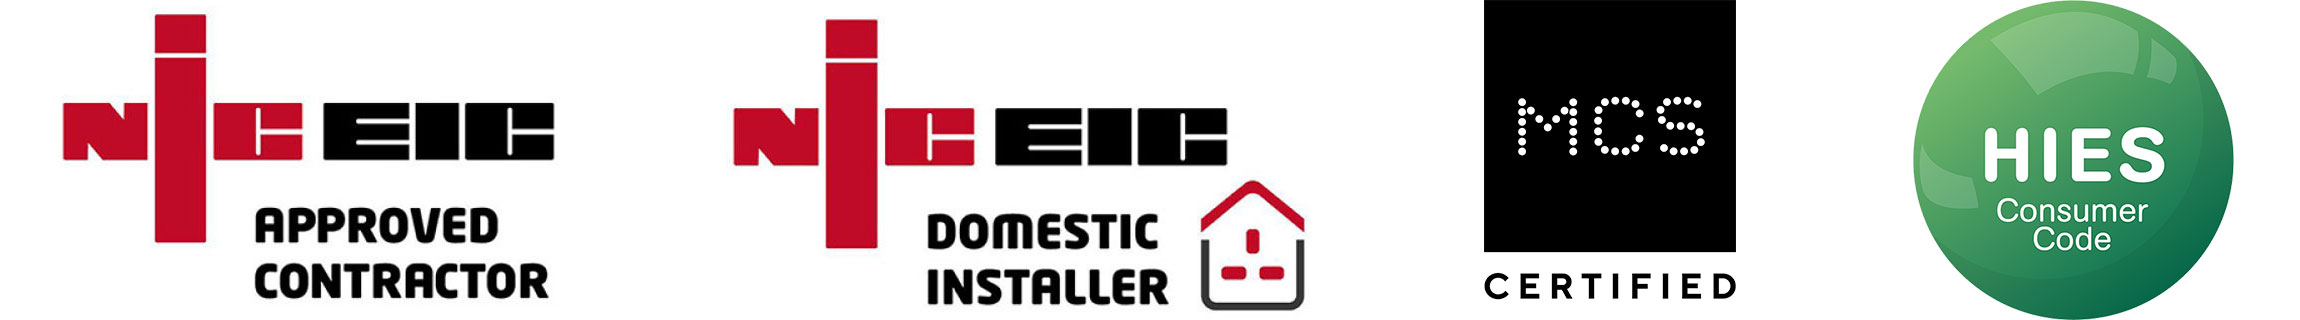 NICEIC Approved Contractor, NICEIC Domestic Installer, MCS Certified, HIES Consumer Code